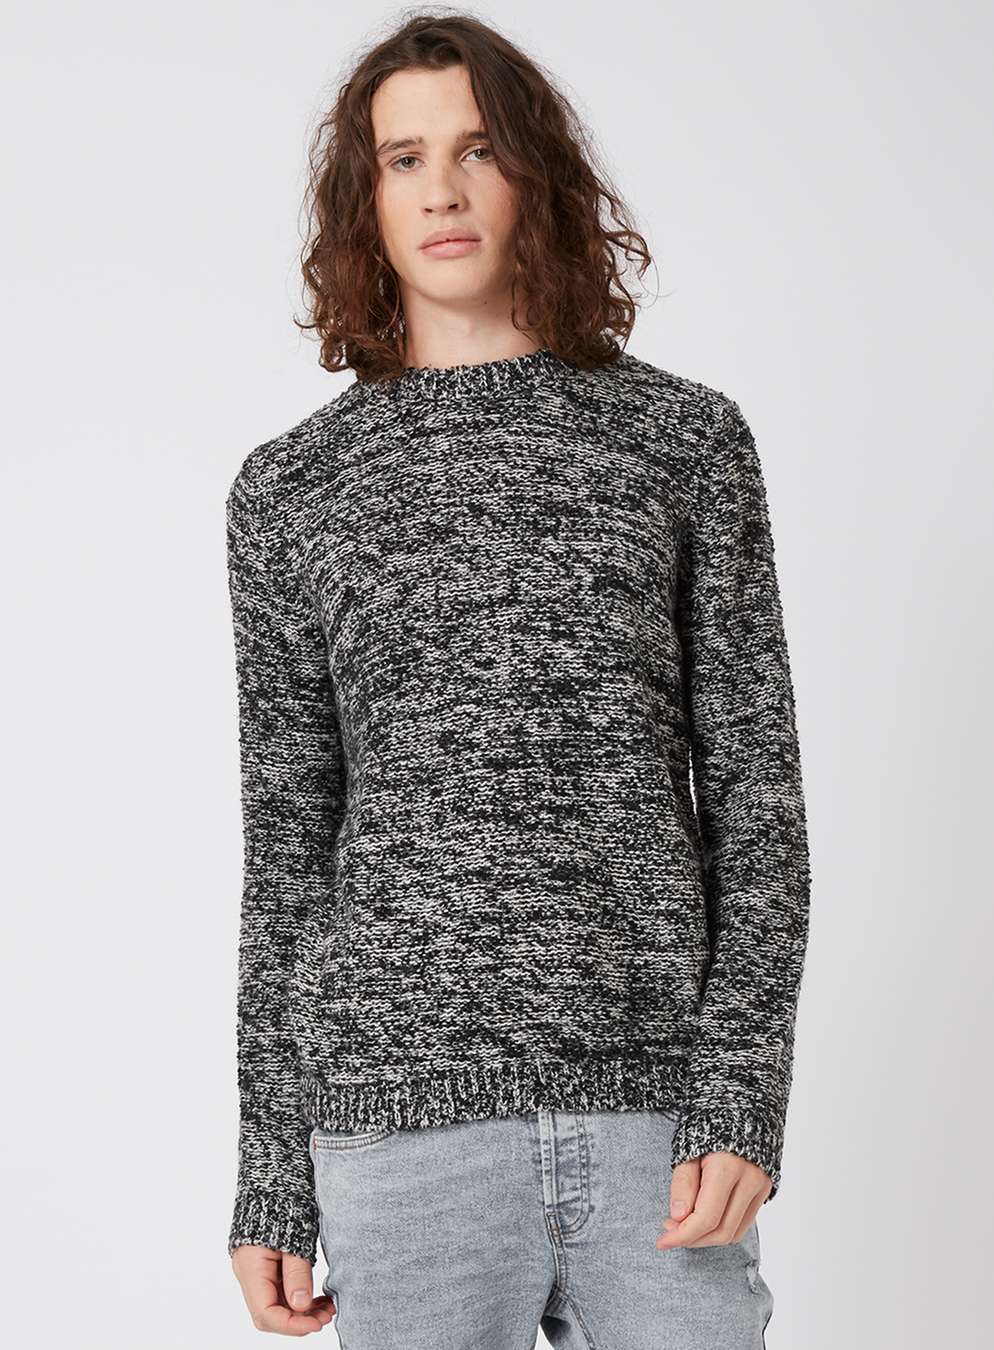 Topman Black And White Fuzzy Texture Slim Fit Jumper